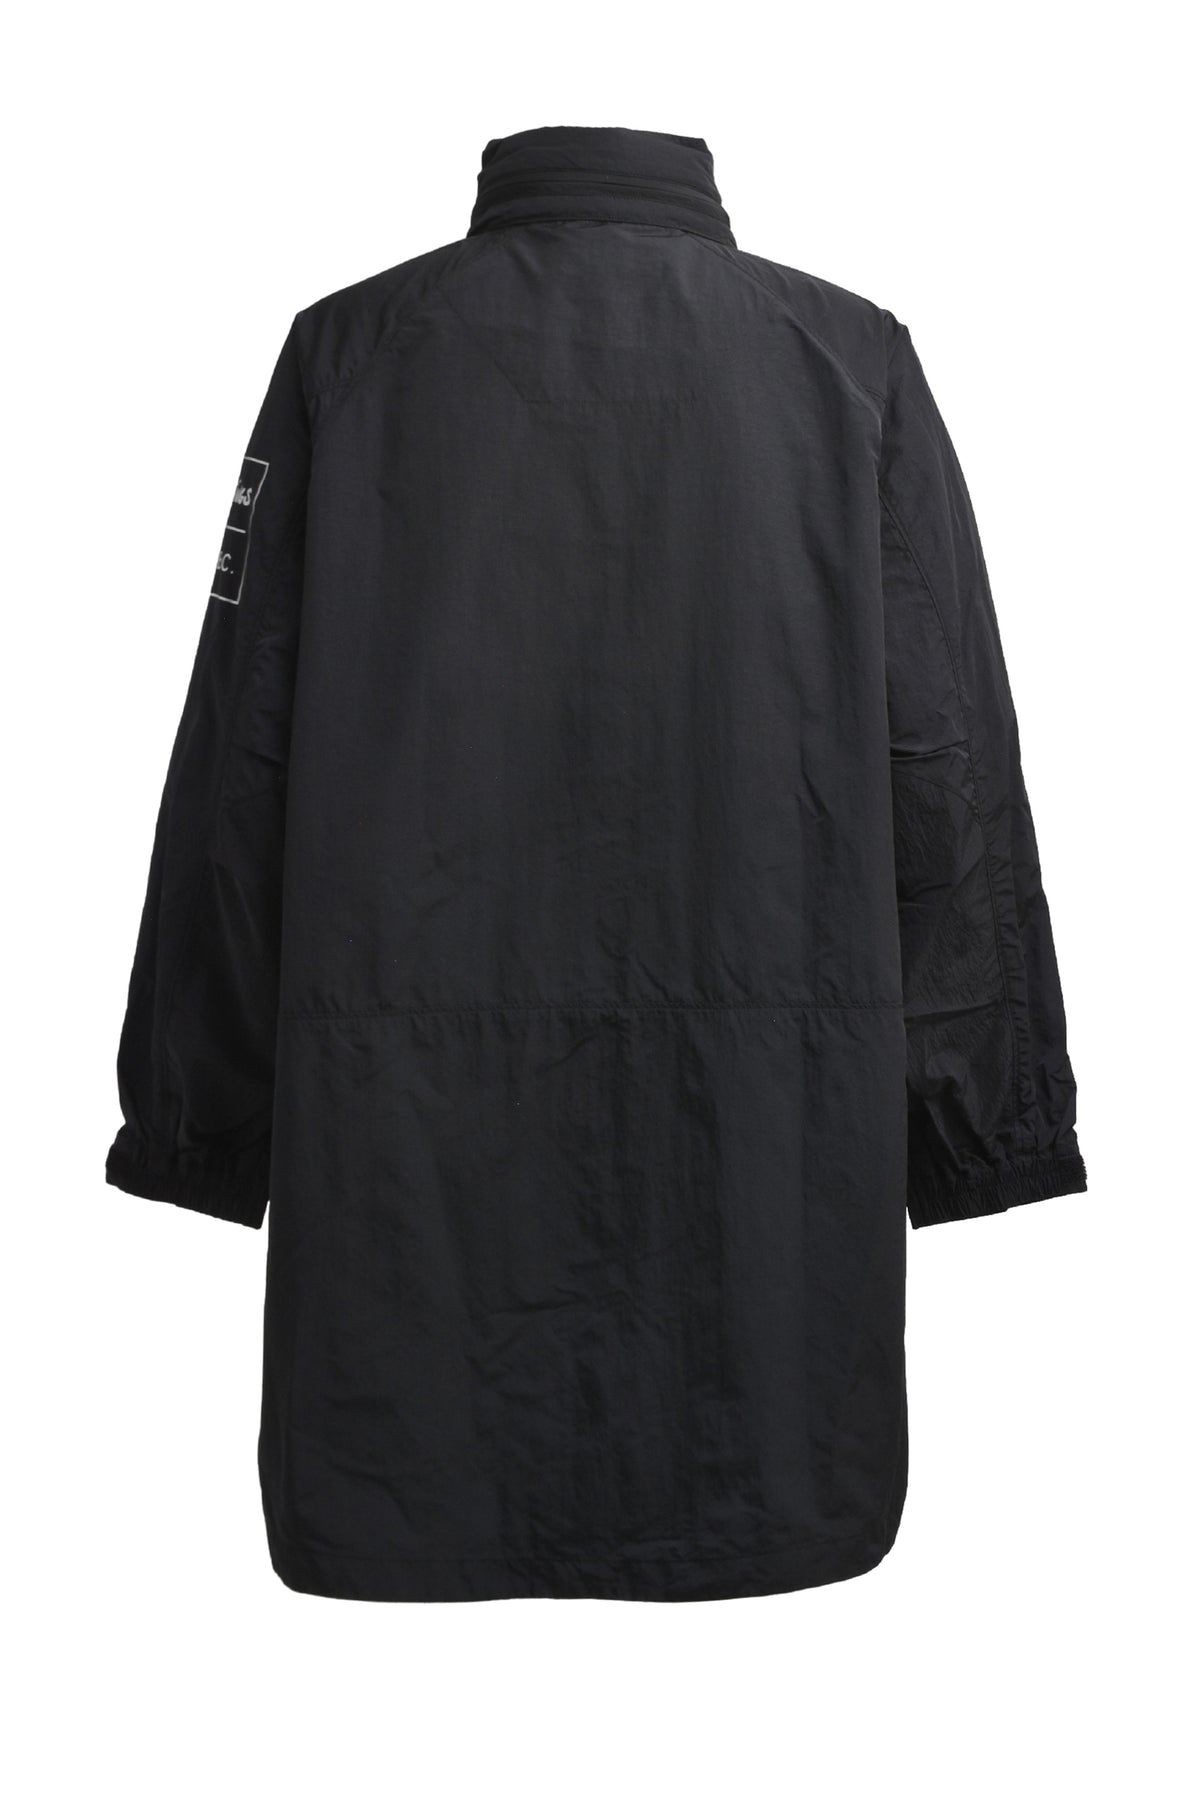 WM x WILDTHINGS 'MONSTER PARKA' / BLK